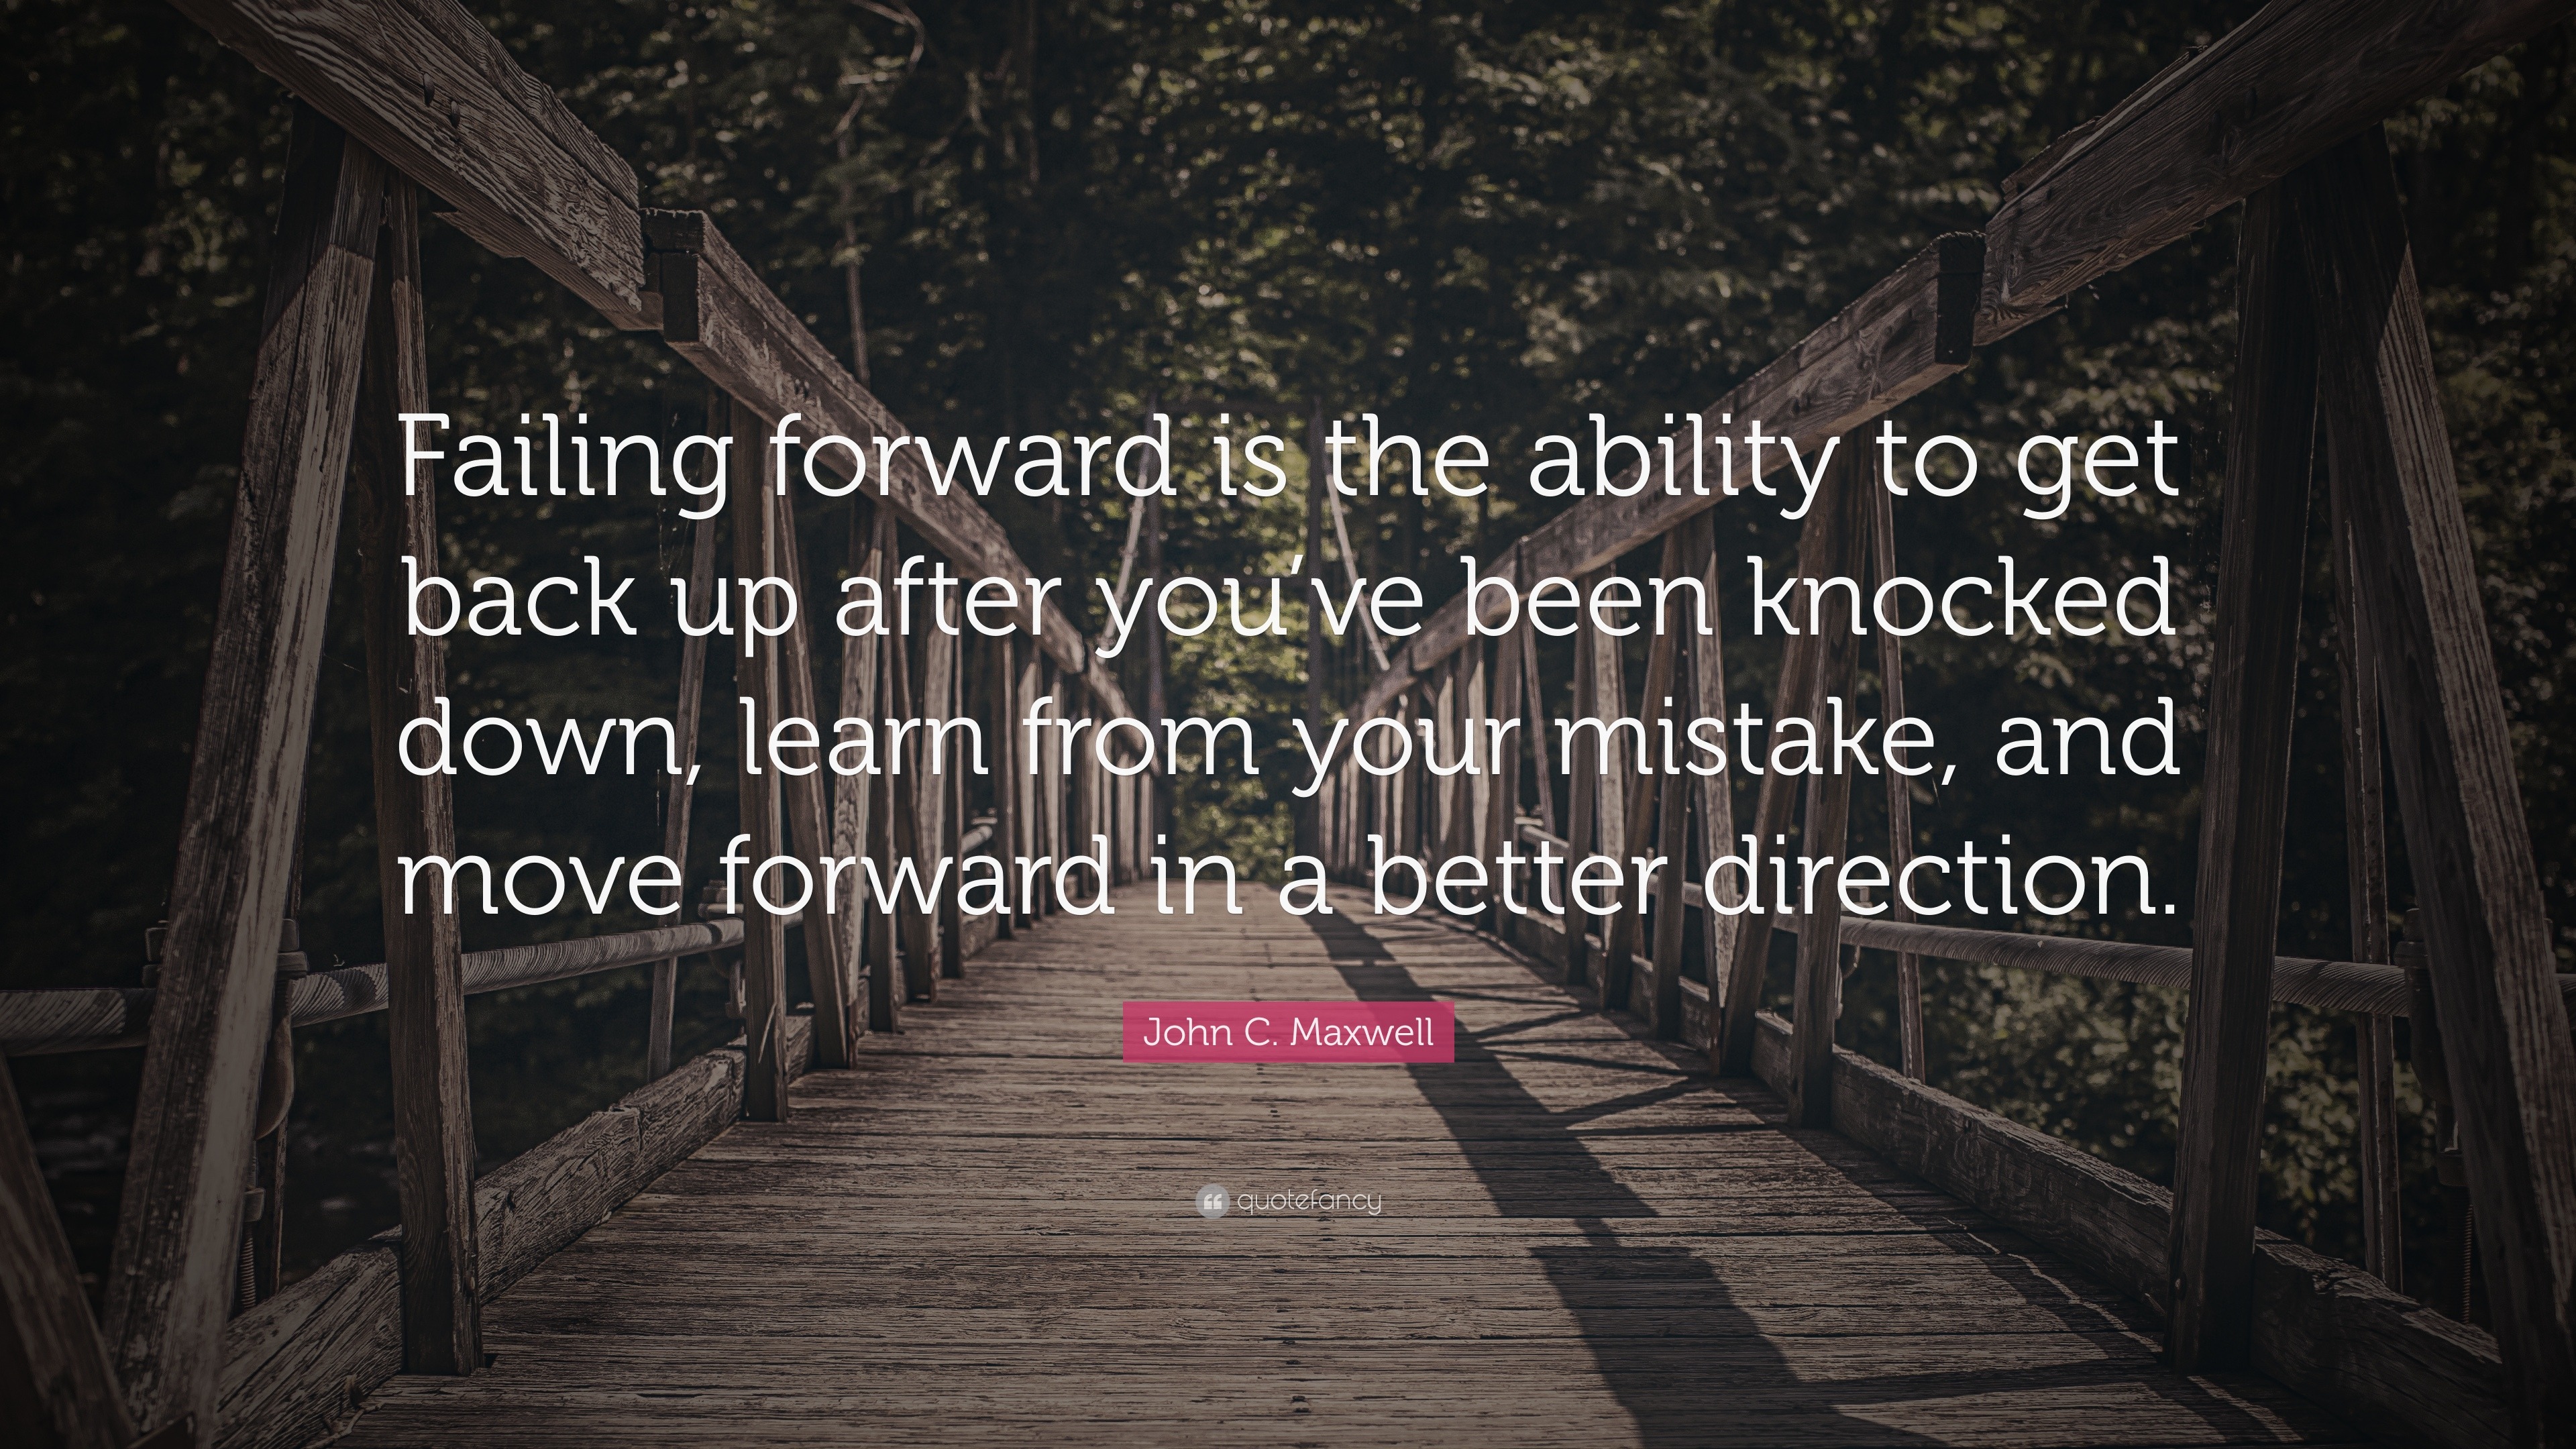 John C Maxwell Quote Failing Forward Is The Ability To Get Back Up After You Ve Been Knocked Down Learn From Your Mistake And Move Forward 12 Wallpapers Quotefancy